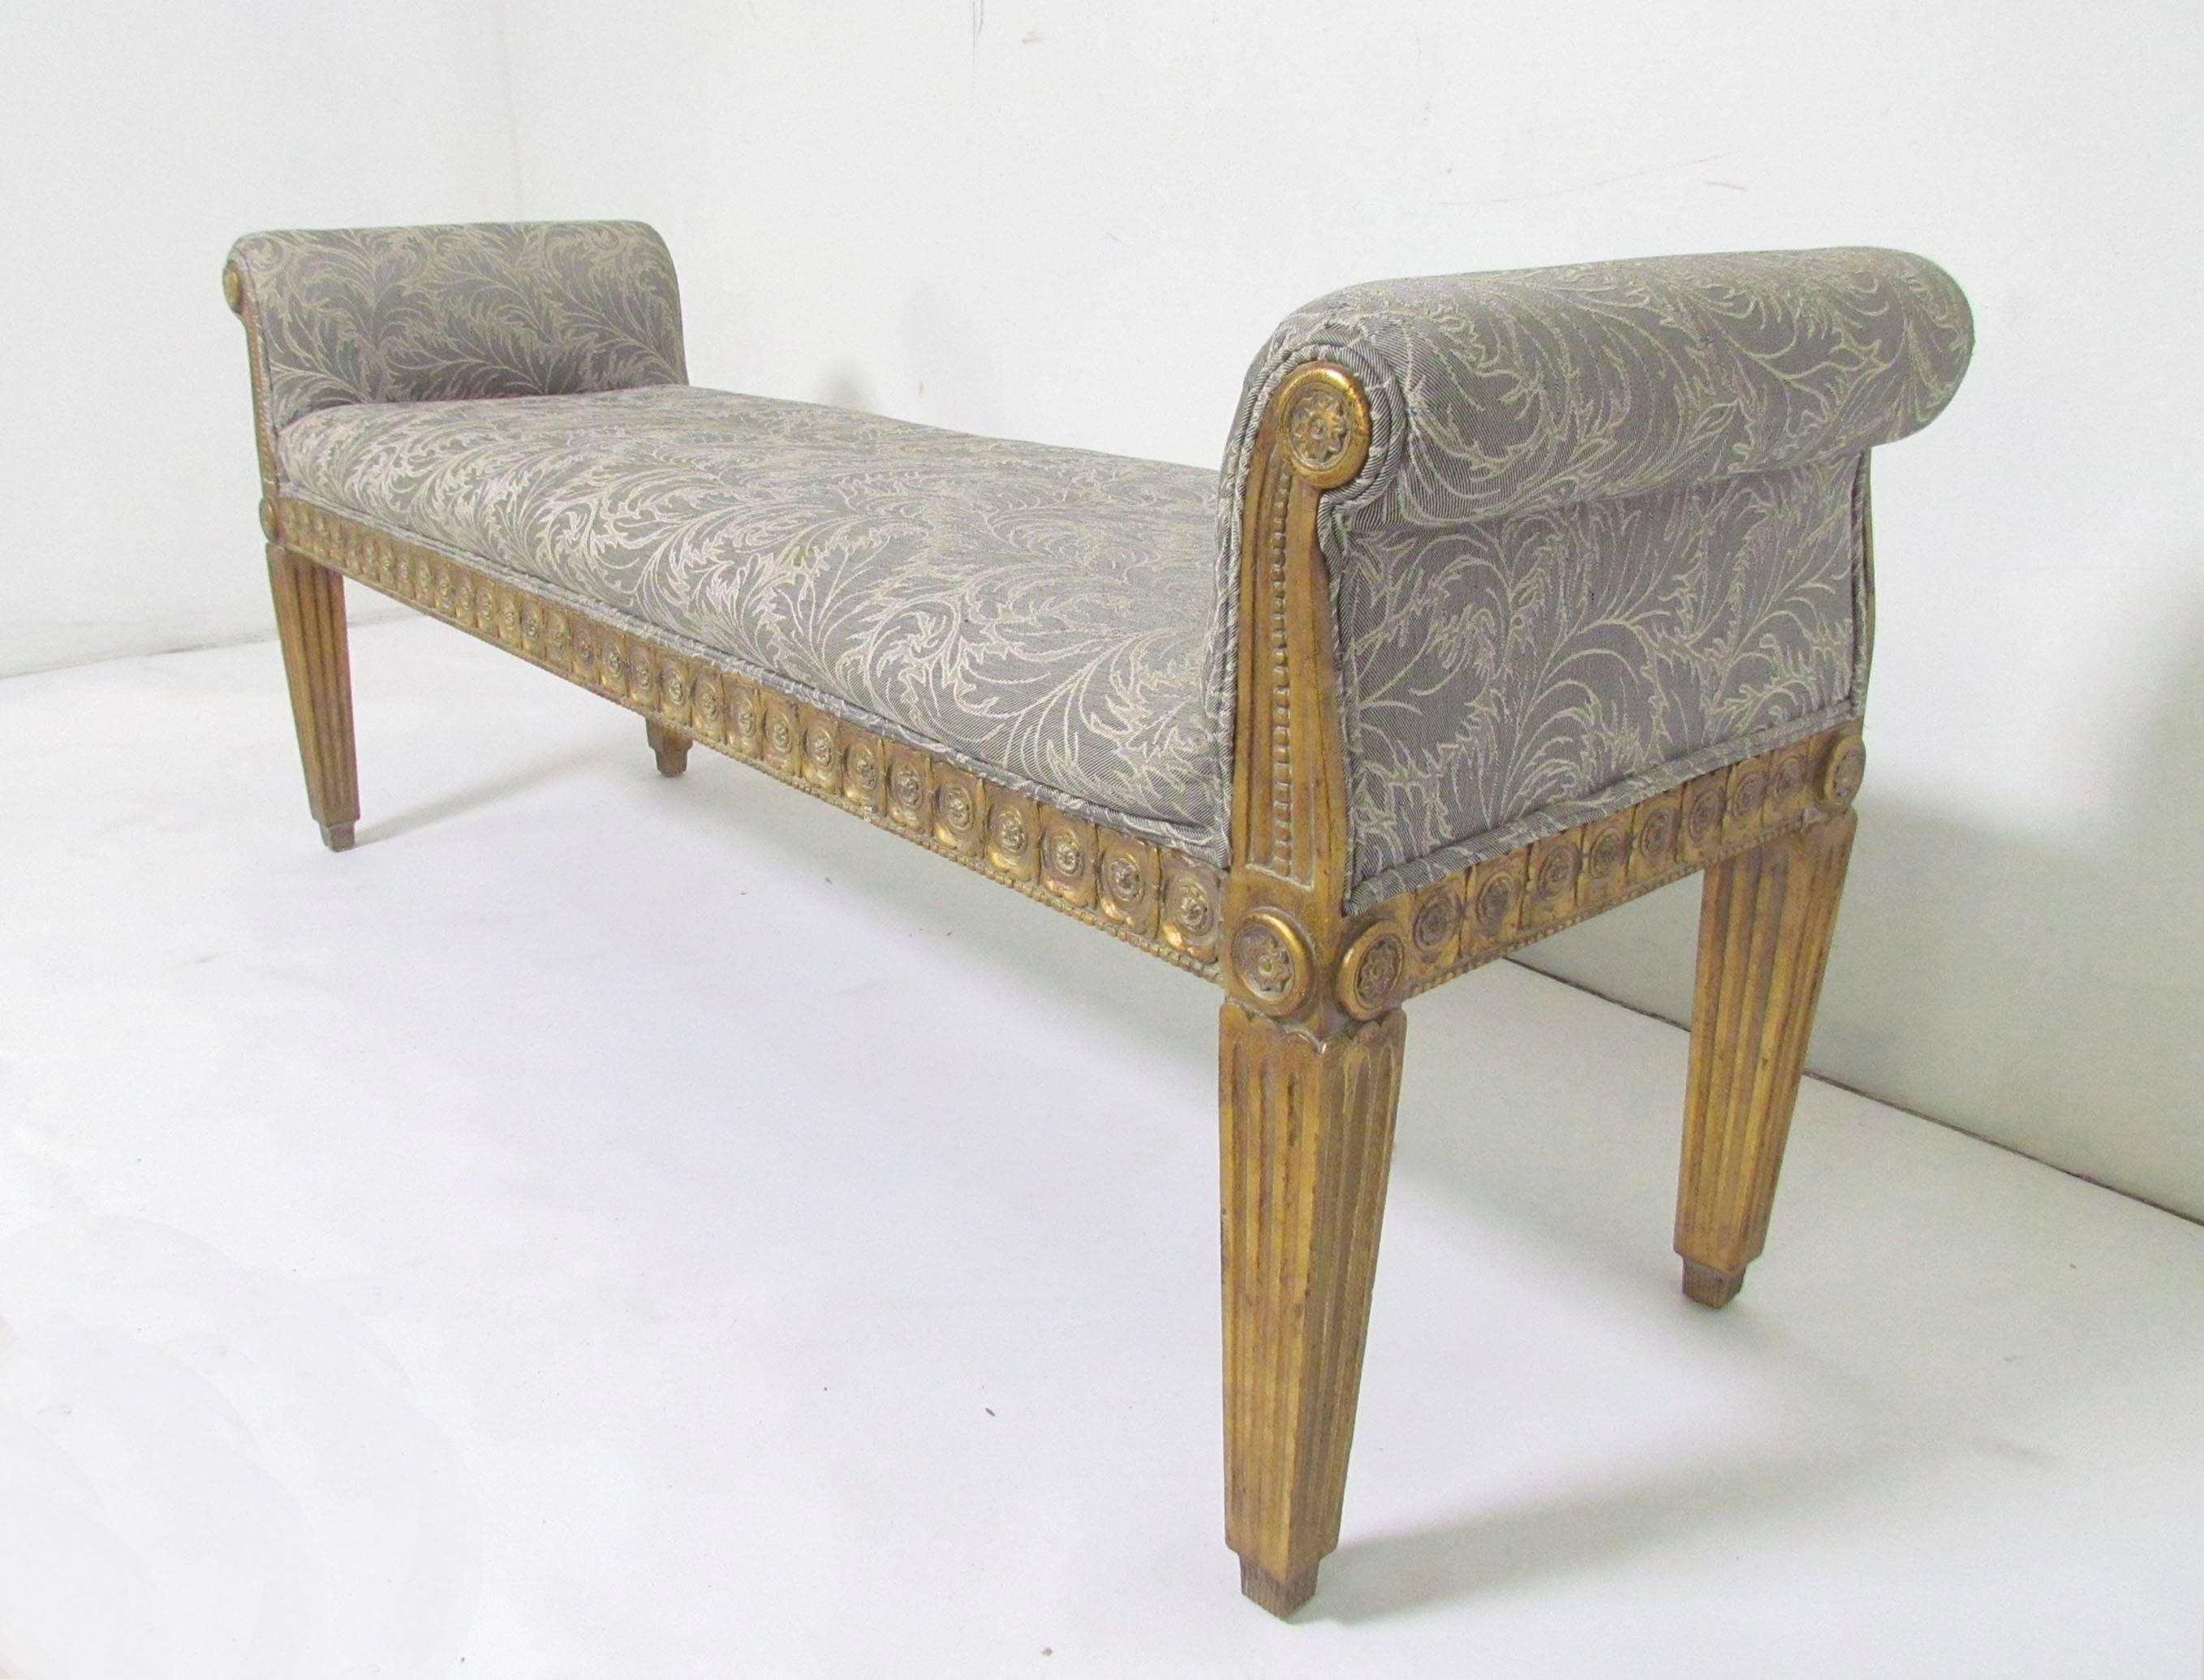 Neoclassical style bench with scroll arms, gilt carved wood frame by Meyer Gunther Martini.